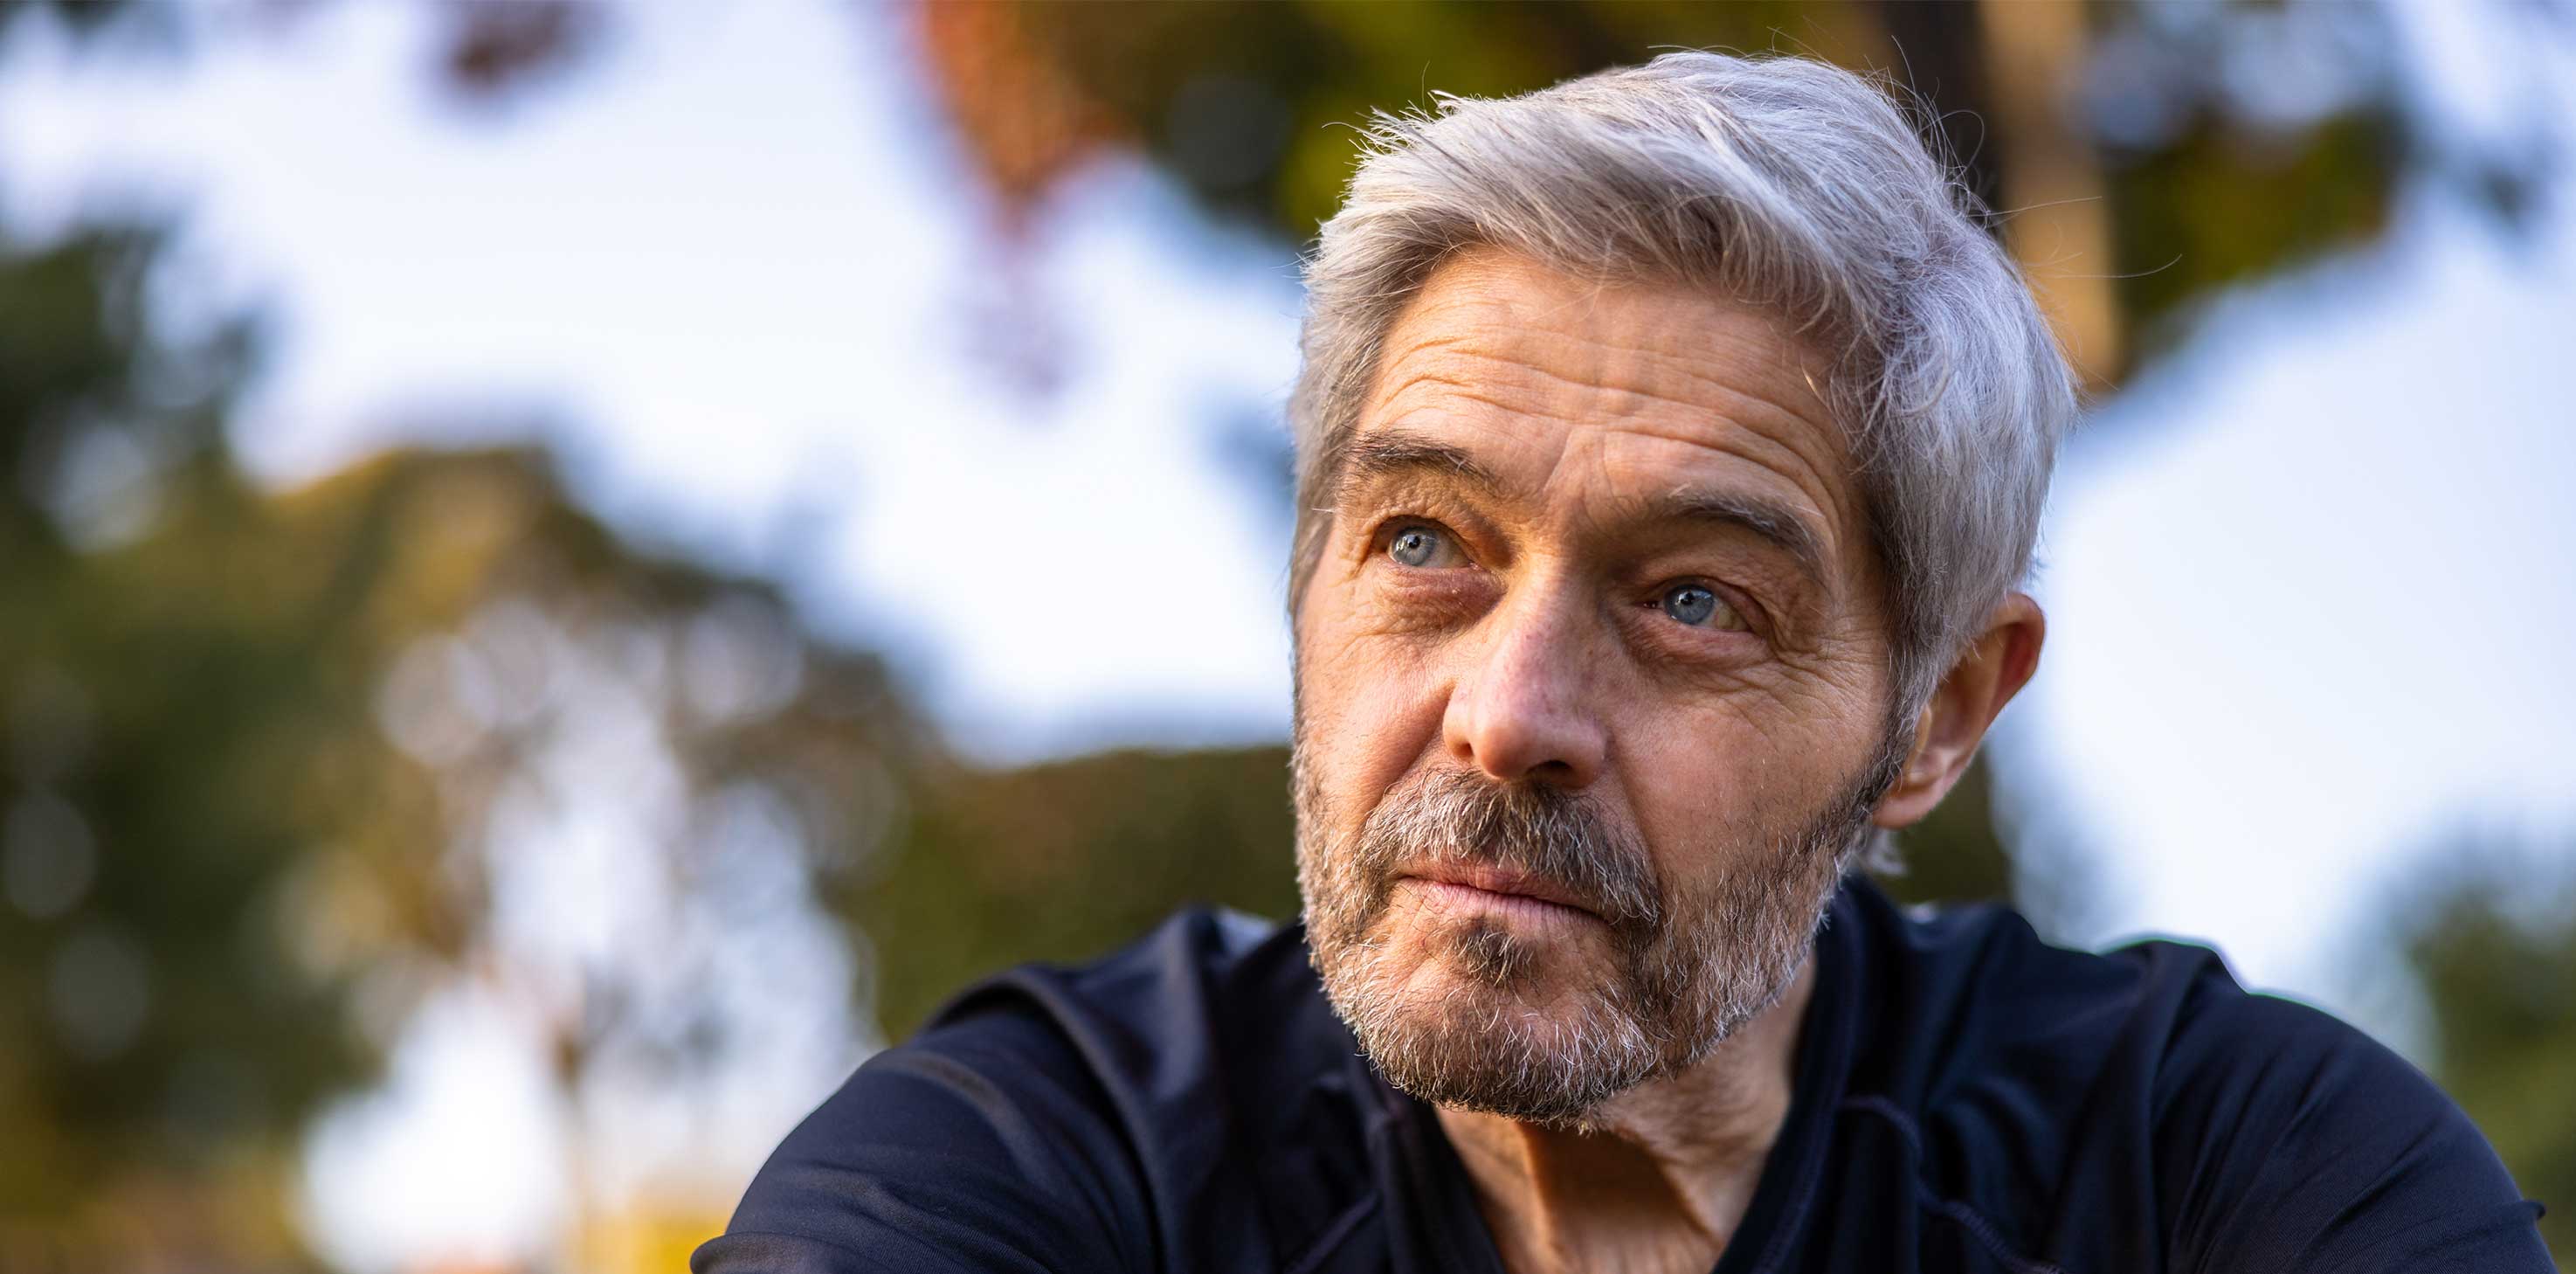 A headshot of a grey-haired Caucasian man, looking pensively off into the distance.